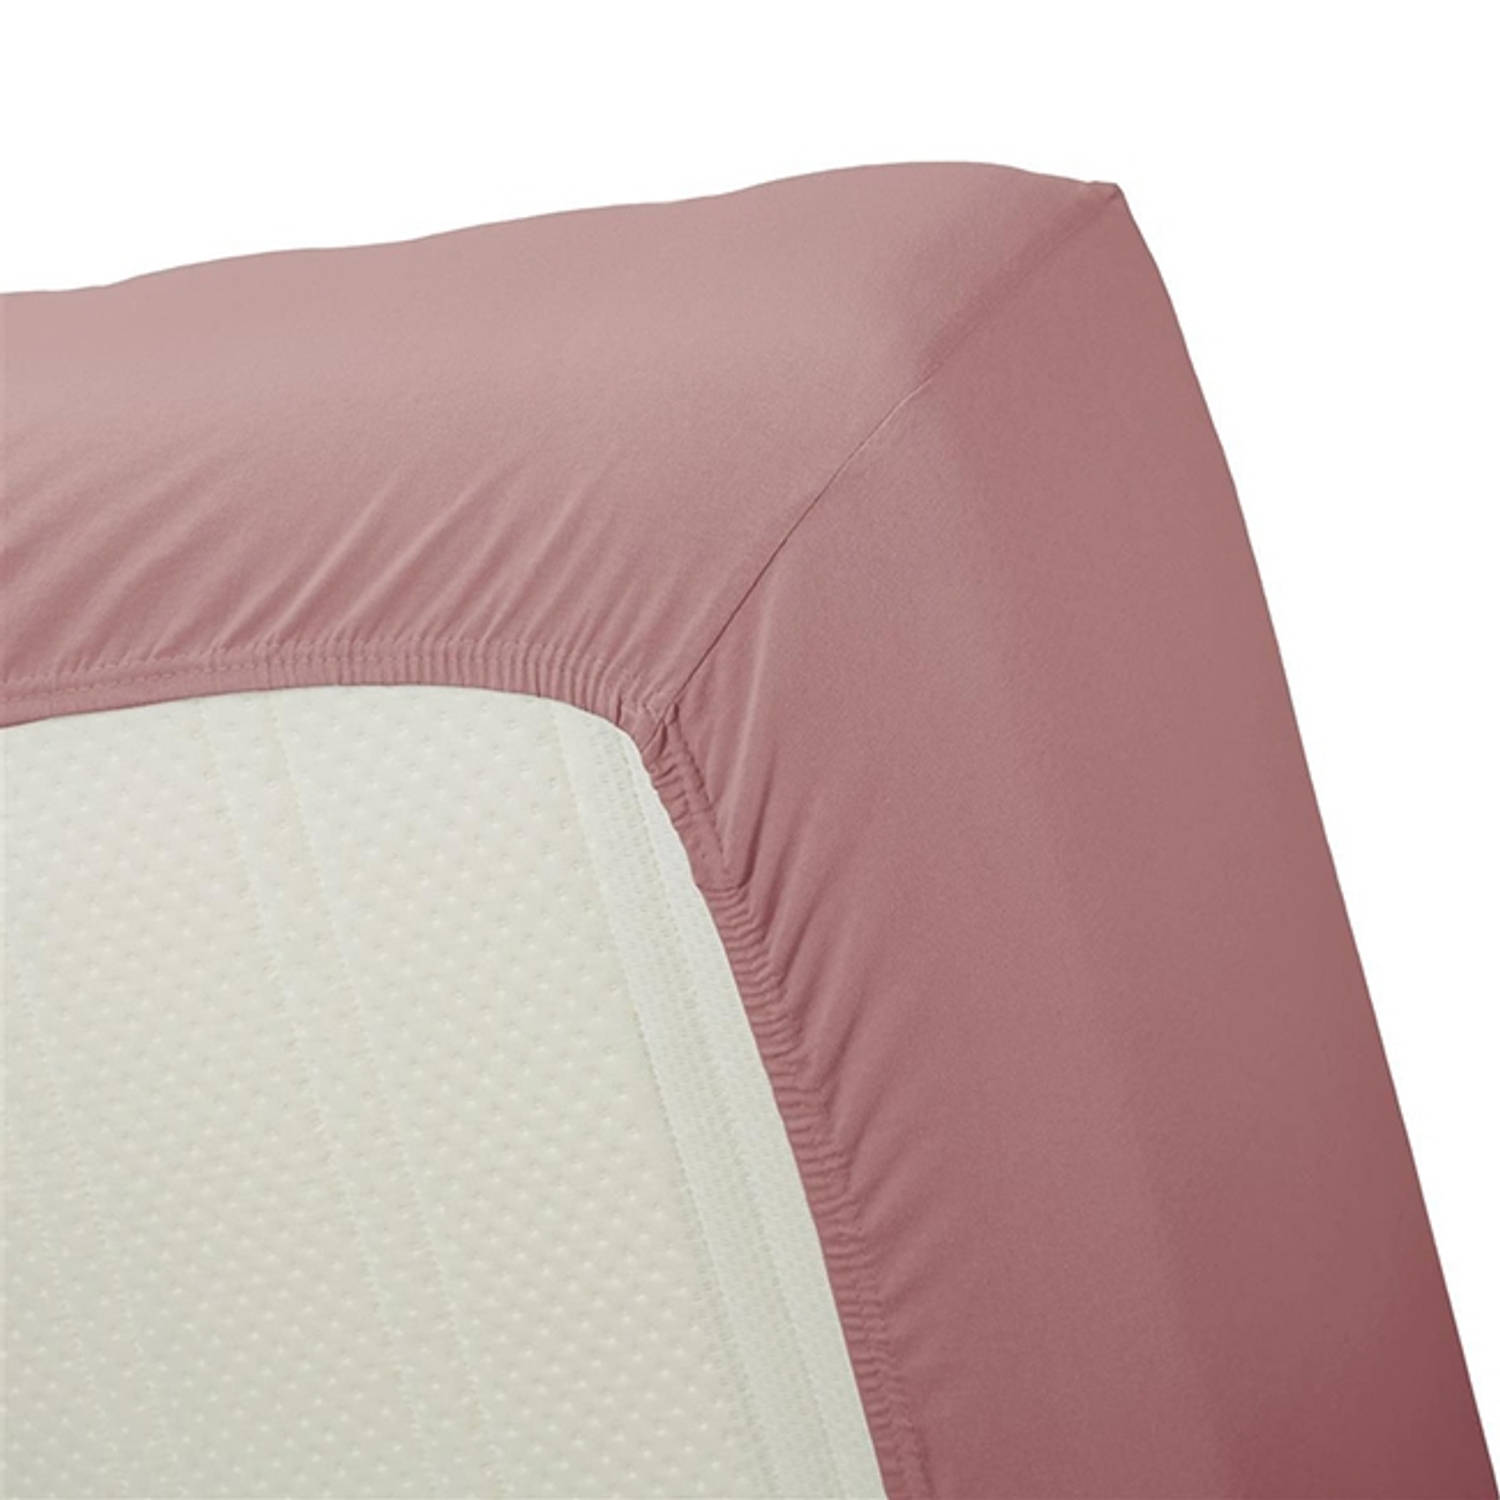 Beddinghouse Hoeslaken Jersey Pink-2-persoons (140 x 200/210/220 cm)